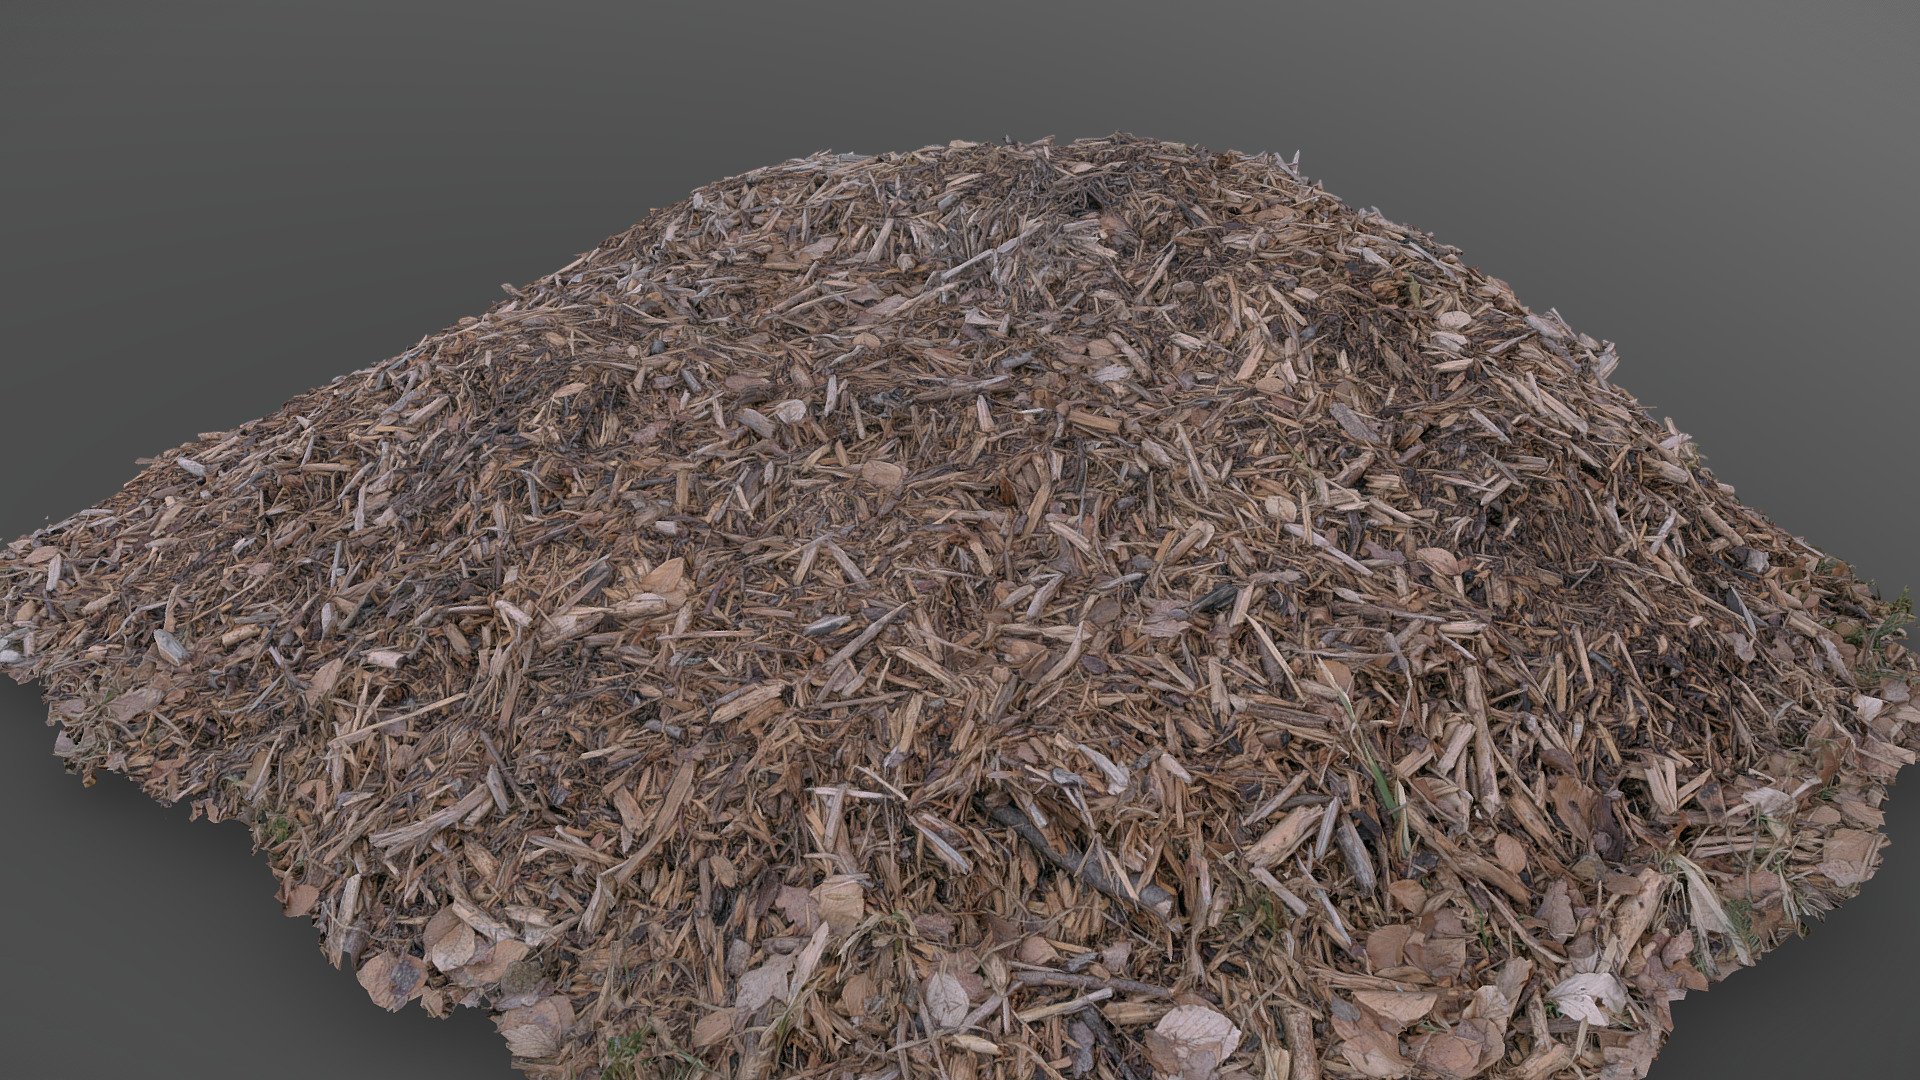 Wood woodchips wooden chips shards mulch pulp bark peat pile heap

photogrammetry scan (150x36mp), 3x8k textures + hd normals - Peat pile - Buy Royalty Free 3D model by matousekfoto 3d model